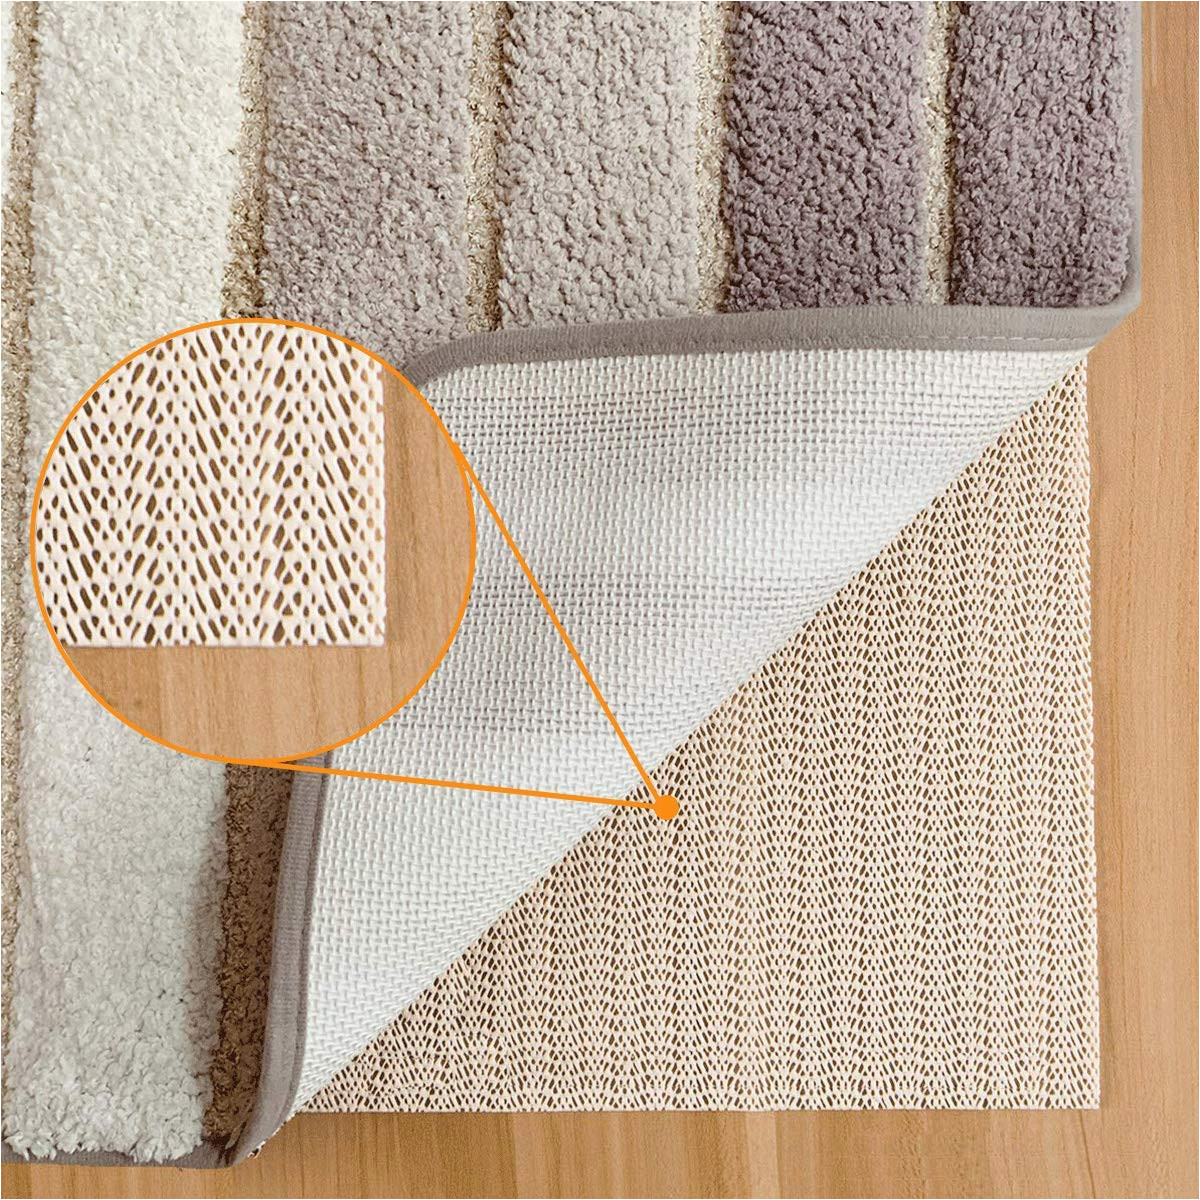 Rug Pads for area Rugs with Hardwood Floors Aurrako 5x7ft Non Slip Rug Pads, area Rug Pad Gripper for Hardwood Floors,rug Pad Gripper for Any Hard Surface Floors with 5×8 area Rugs,runner Anti …